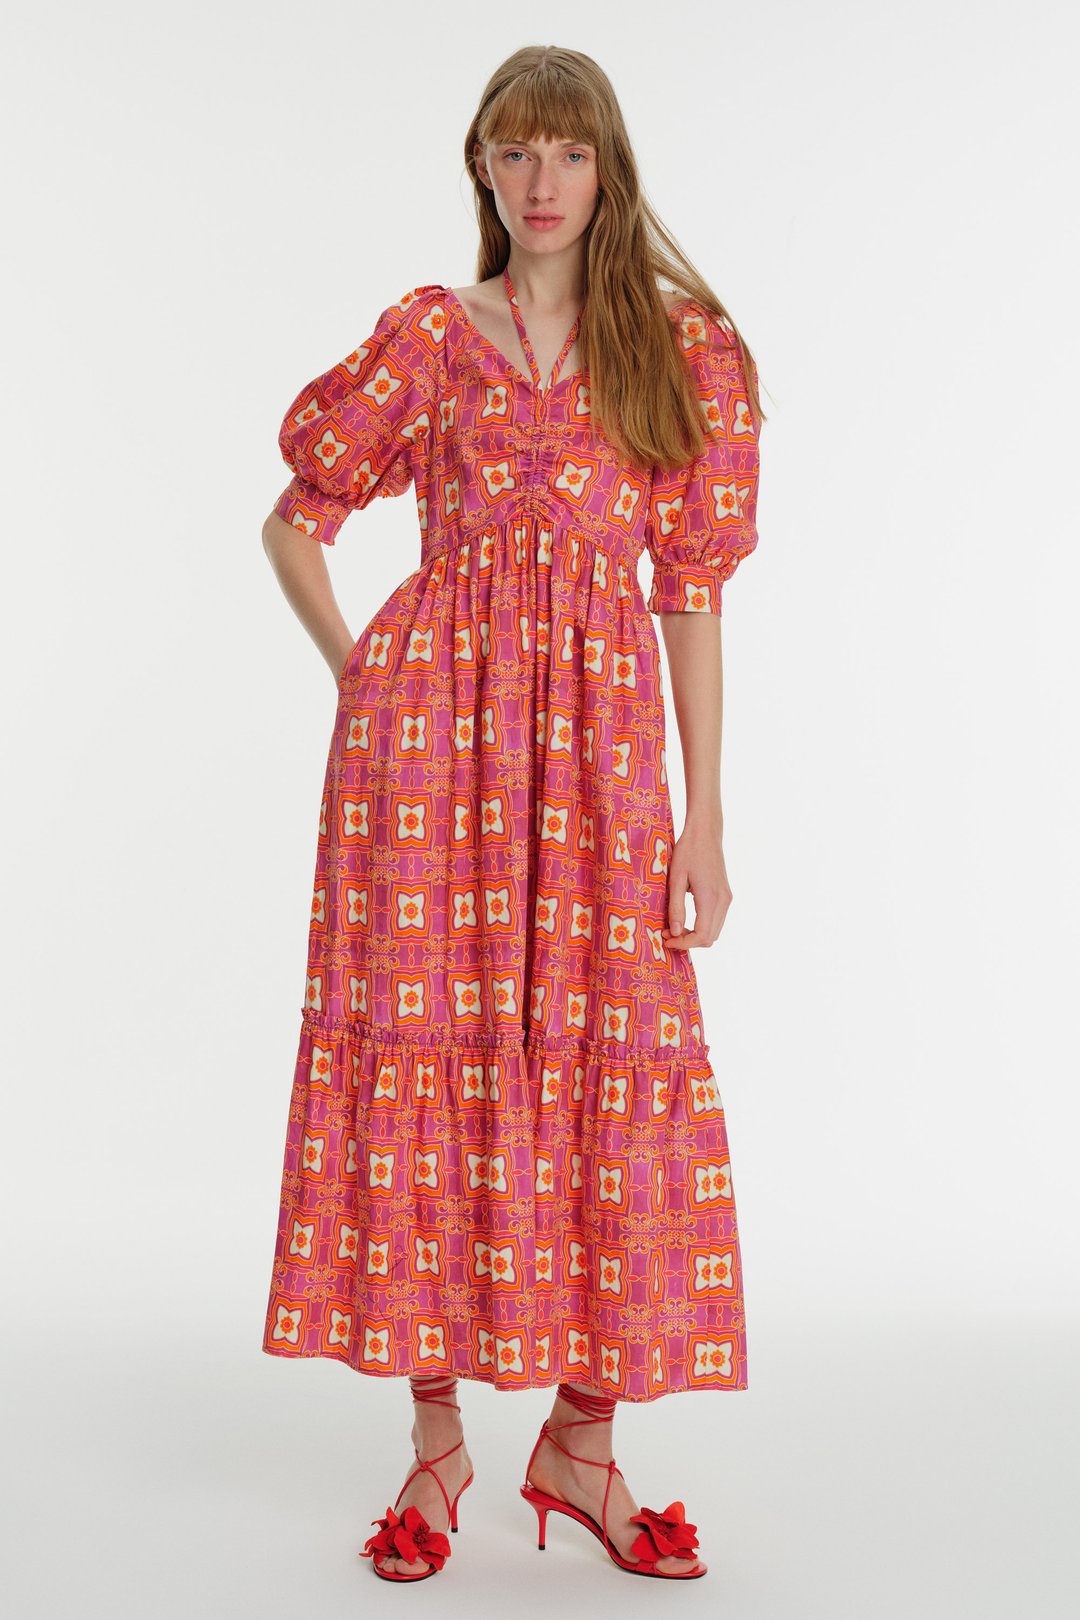 Short Sleeve Patterned Midi Length Cotton Dress with Ties at the Neck 1